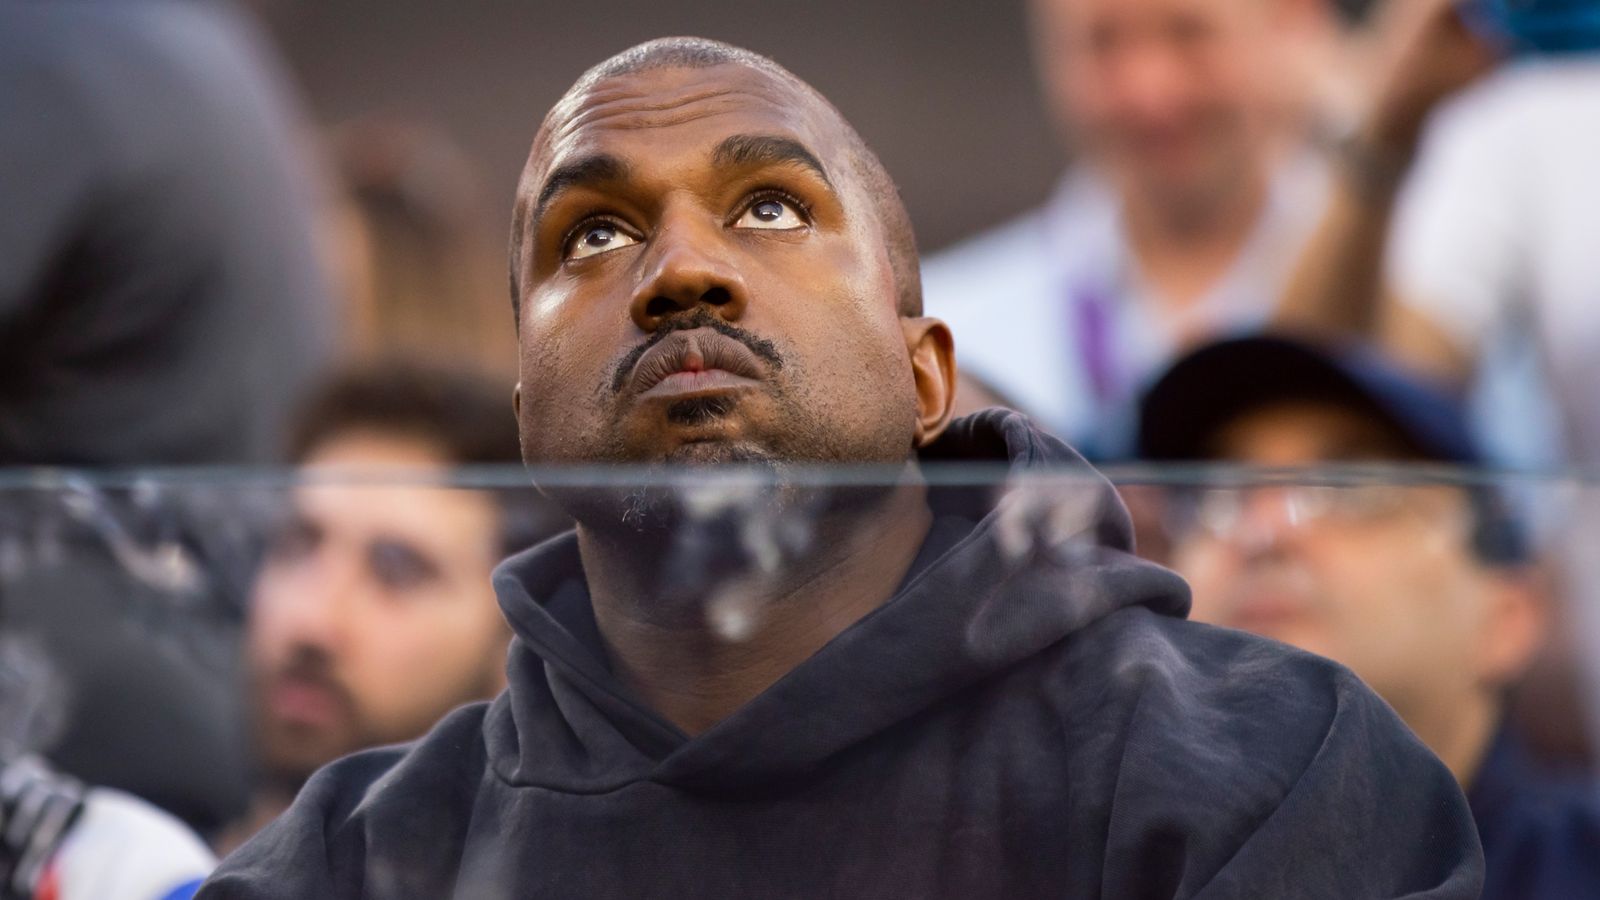 Kanye West sued for $1m by ex-employee who claims he was forced to work in dangerous conditions and sleep on the floor for months | Ents & Arts News